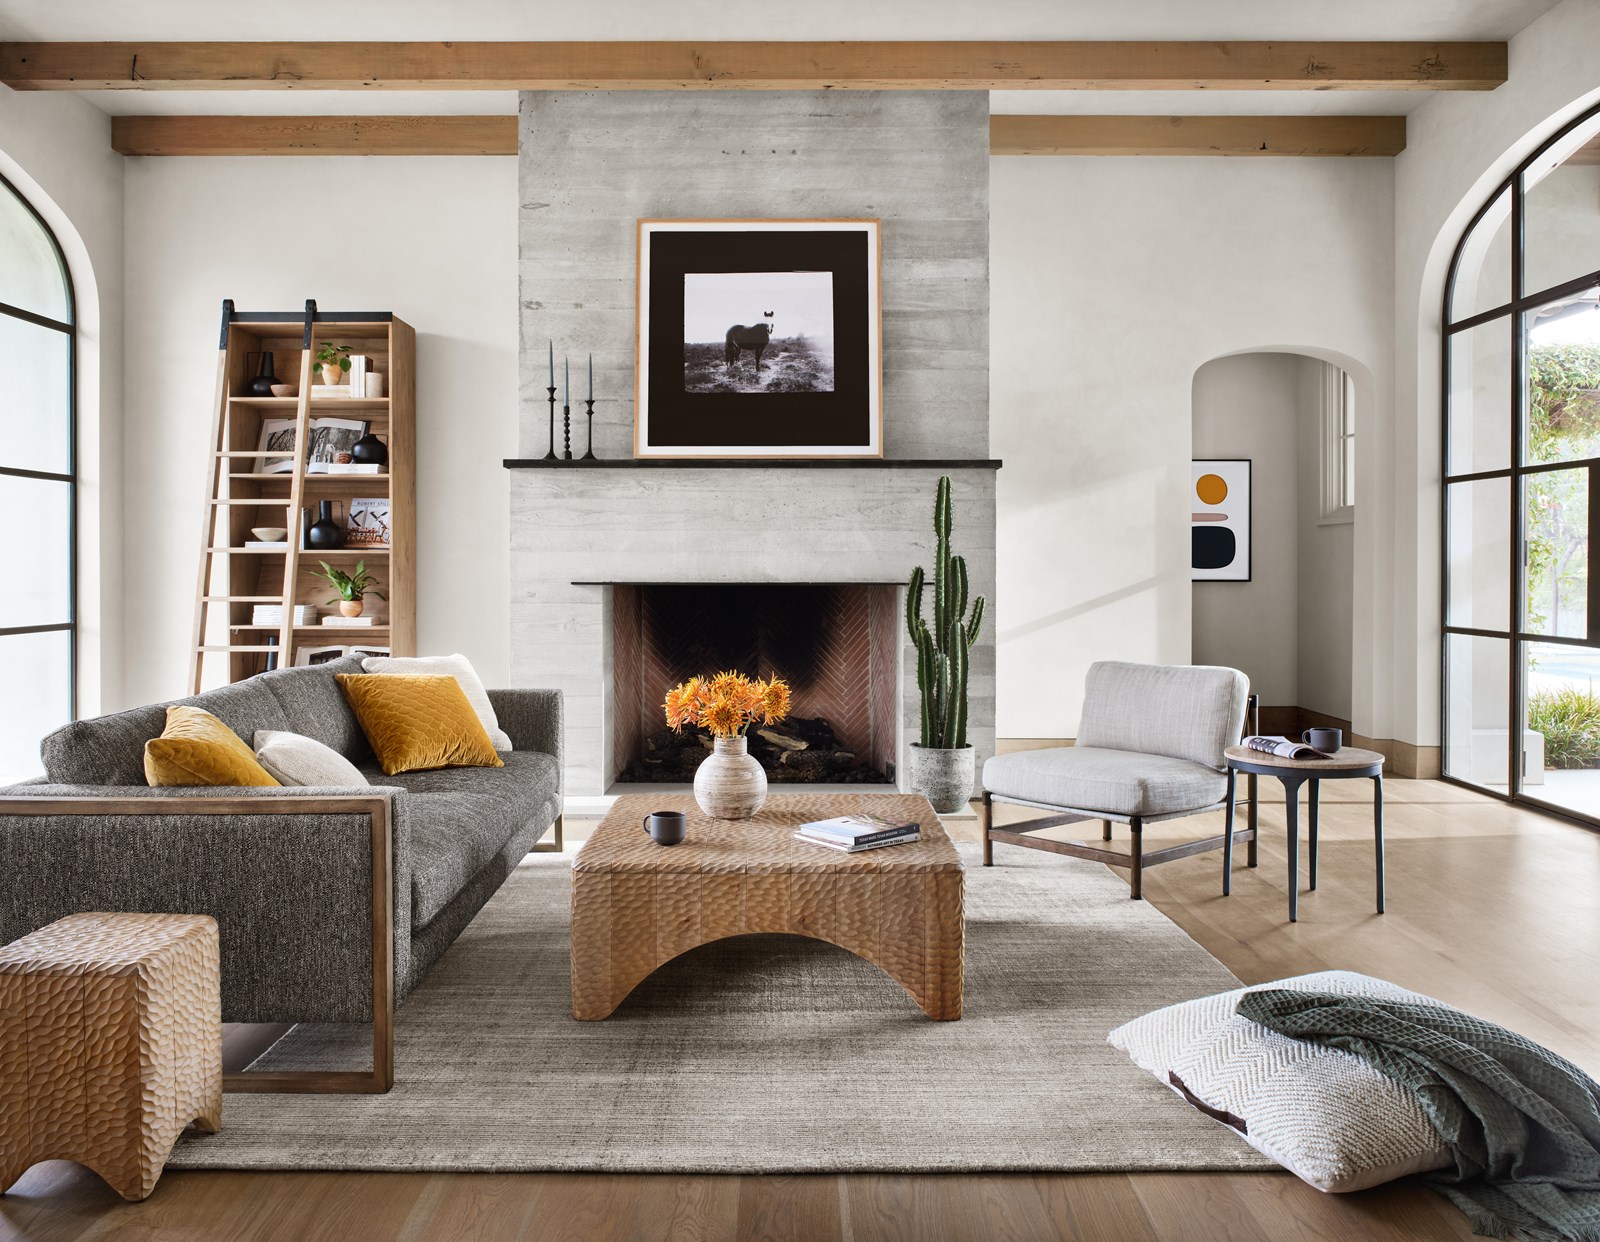 2021 Interior Design Trends You’ll Love - Luxe Home Interiors